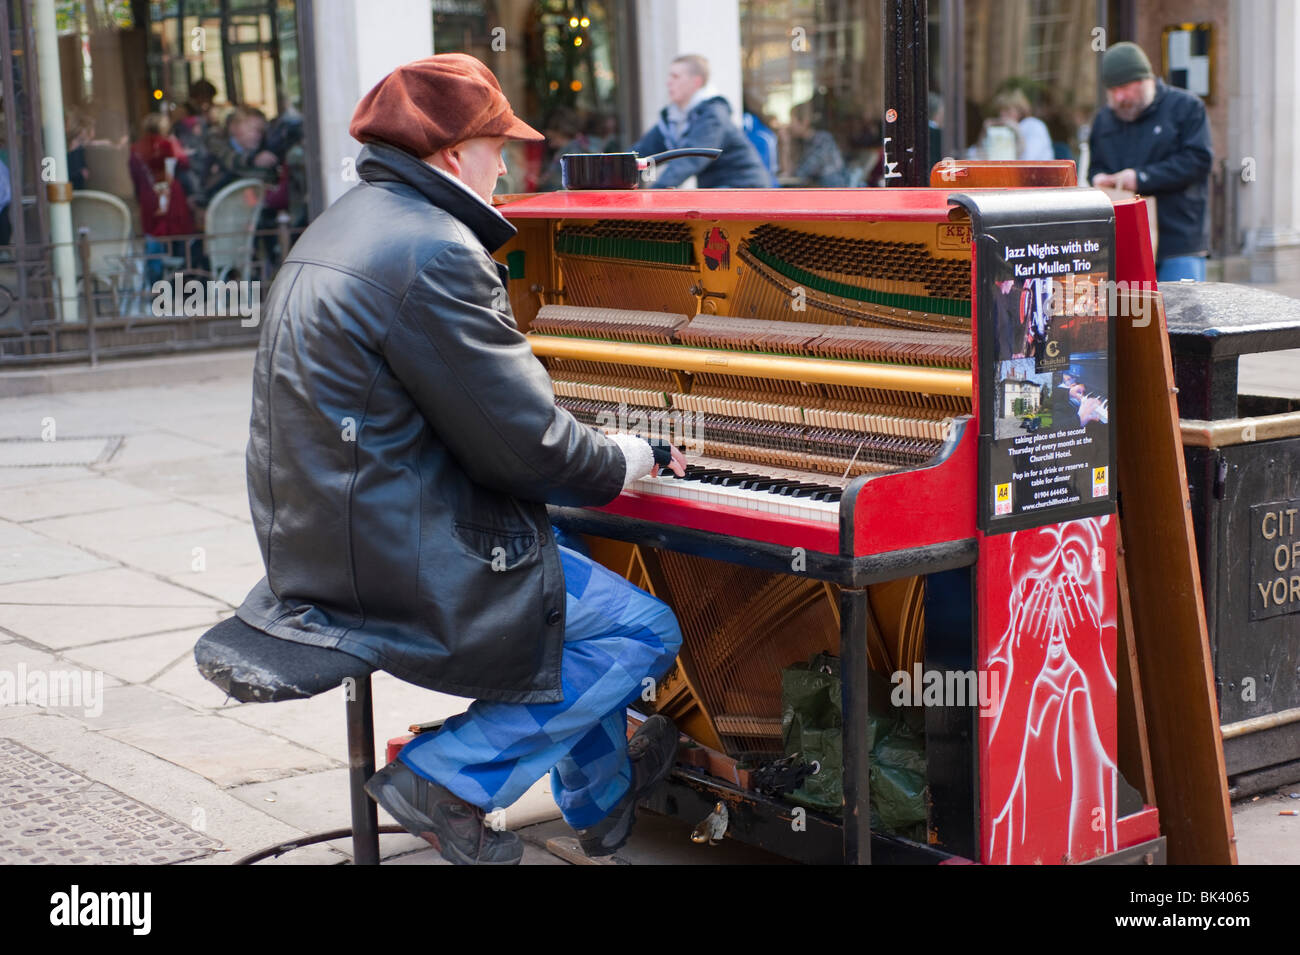 Street entertainer playing upright piano in public shopping area Stock  Photo - Alamy